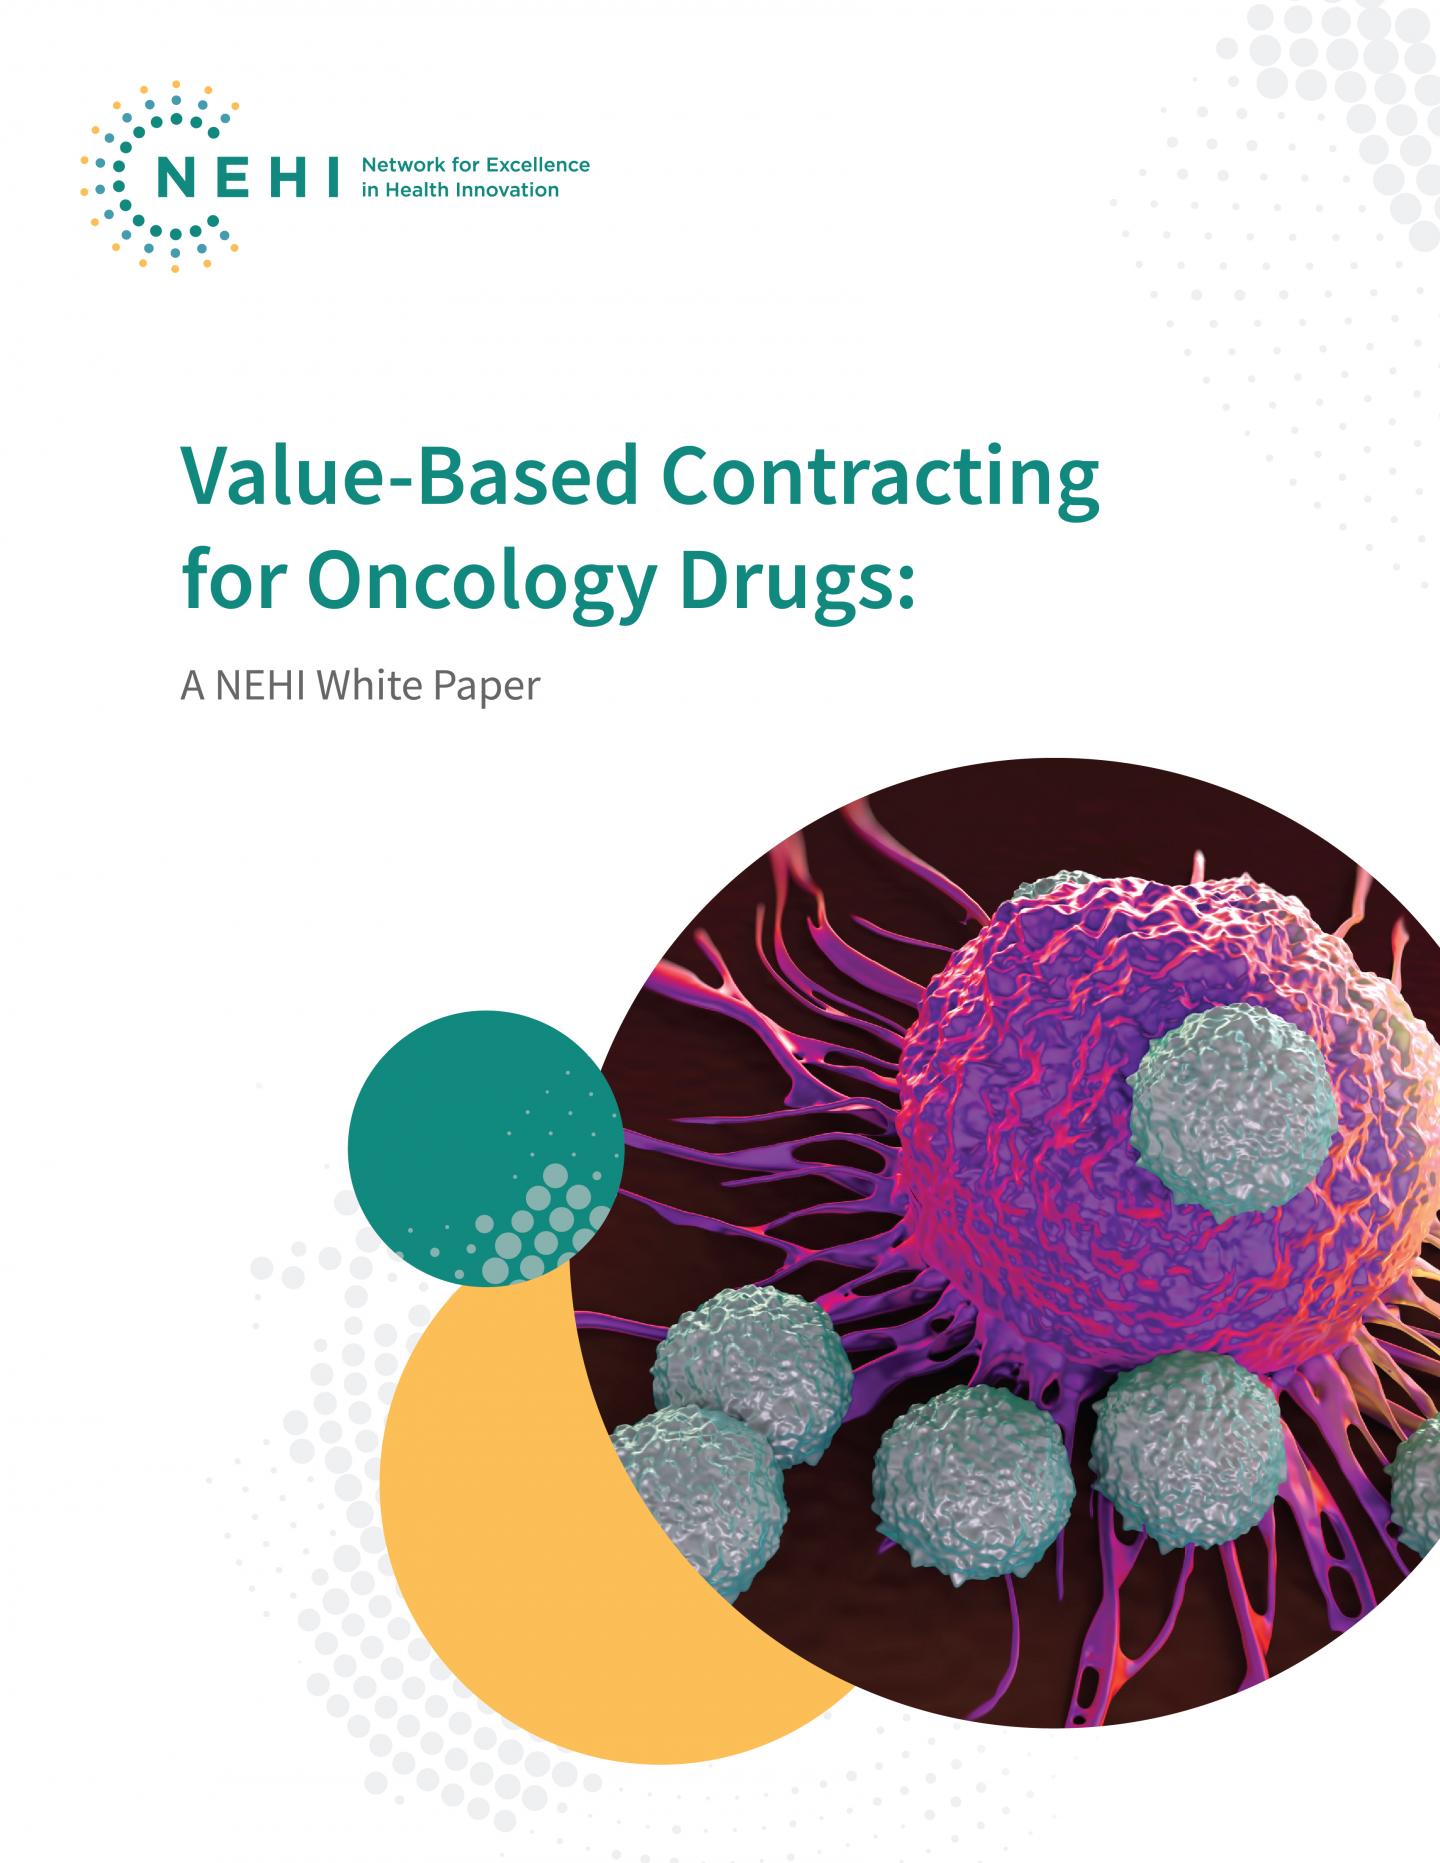 Value-Based Contracting for Oncology Drugs: A NEHI White Paper